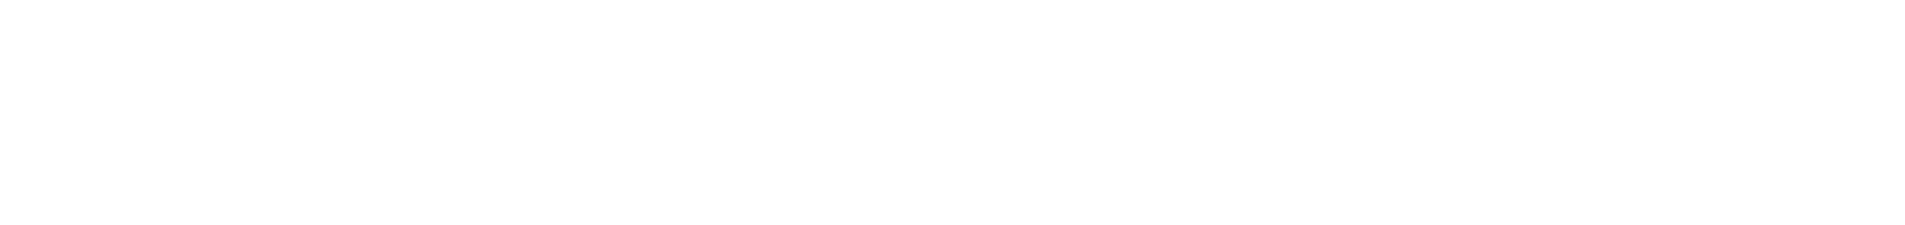 What's NuFlare Technology?